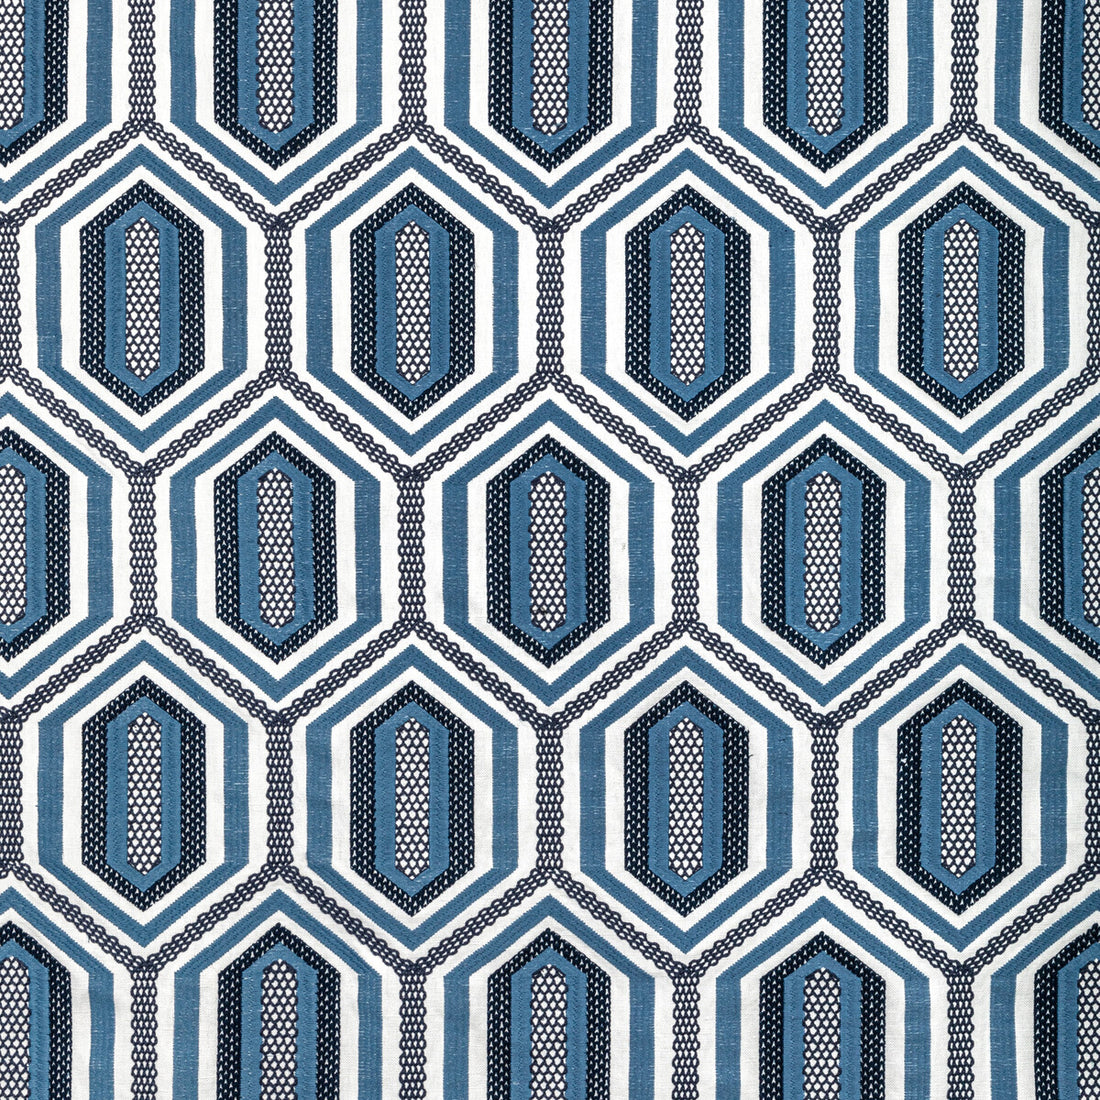 Kaleidoscope Emb fabric in ink color - pattern 36368.51.0 - by Kravet Couture in the Corey Damen Jenkins Trad Nouveau collection